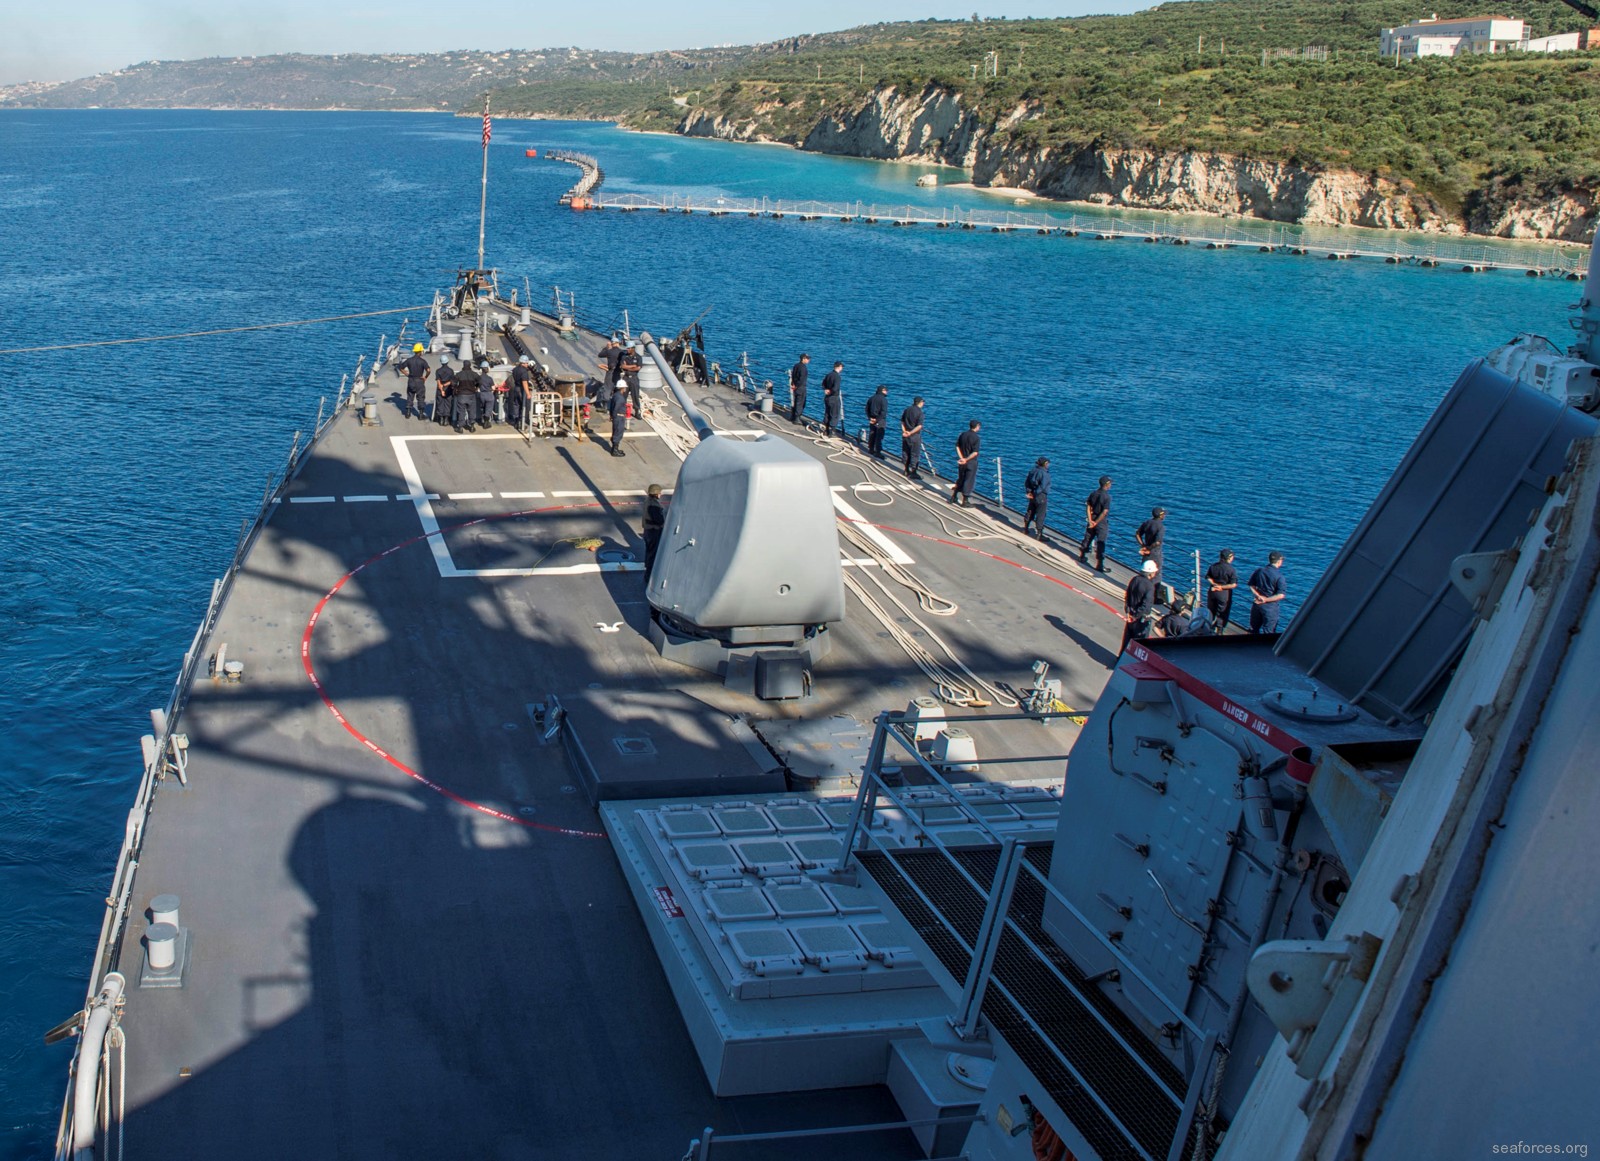 ddg-58 uss laboon guided missile destroyer us navy 21 souda bay greece